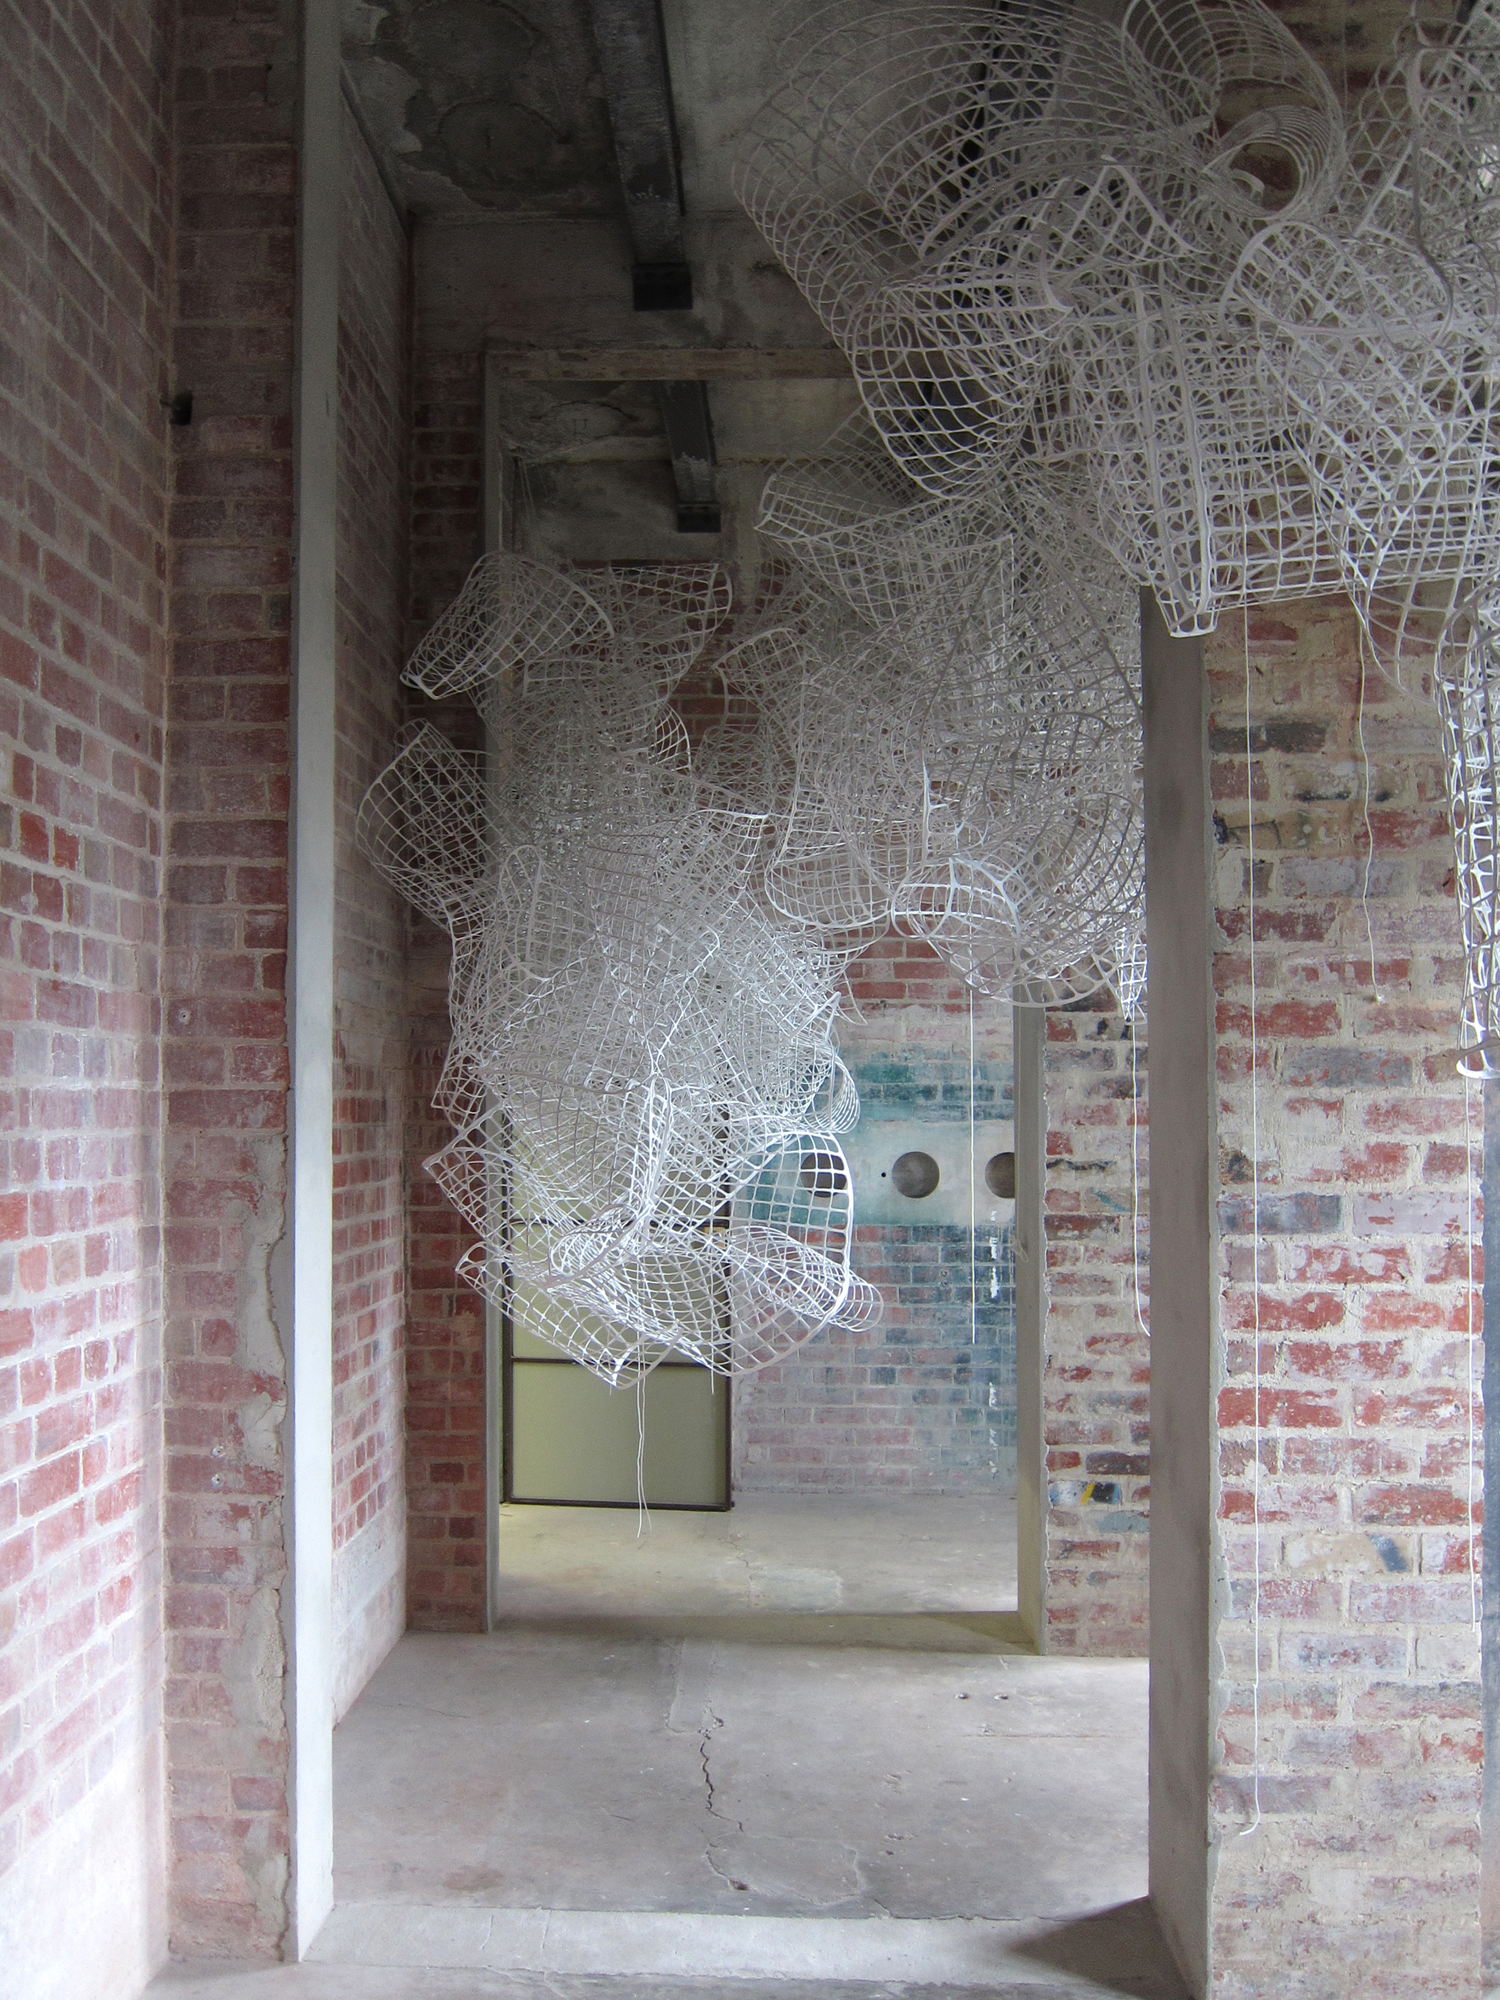   Runnel,  2011. Finalist in Substation Contemporary Art Prize.  Plastic trellis, rope, light. Dimensions variable. 